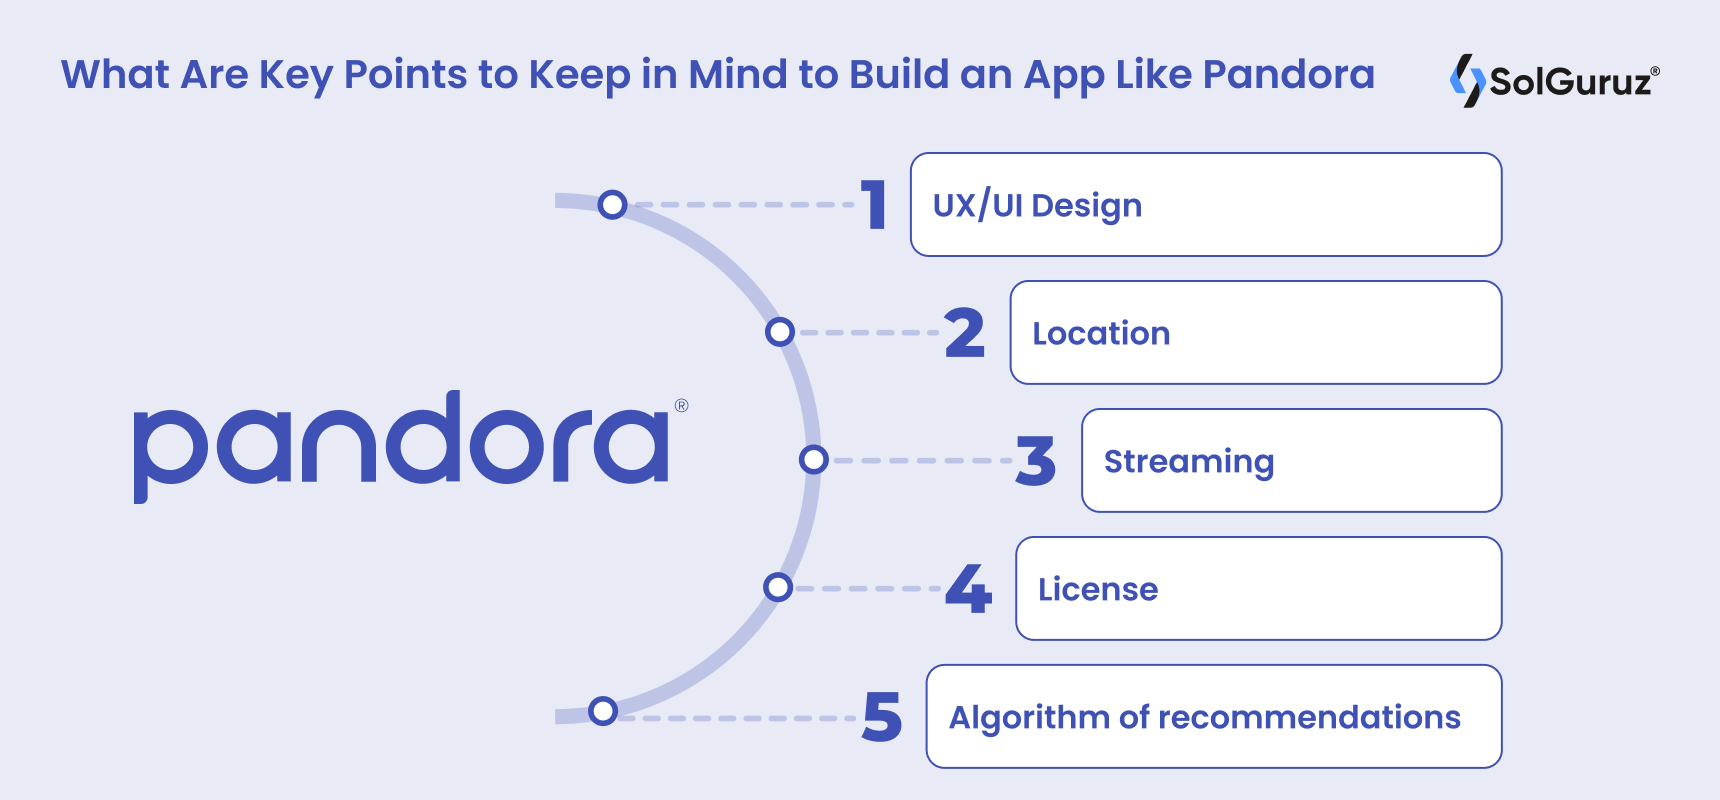 What Are Key Points to Keep in Mind to Build an App Like Pandora